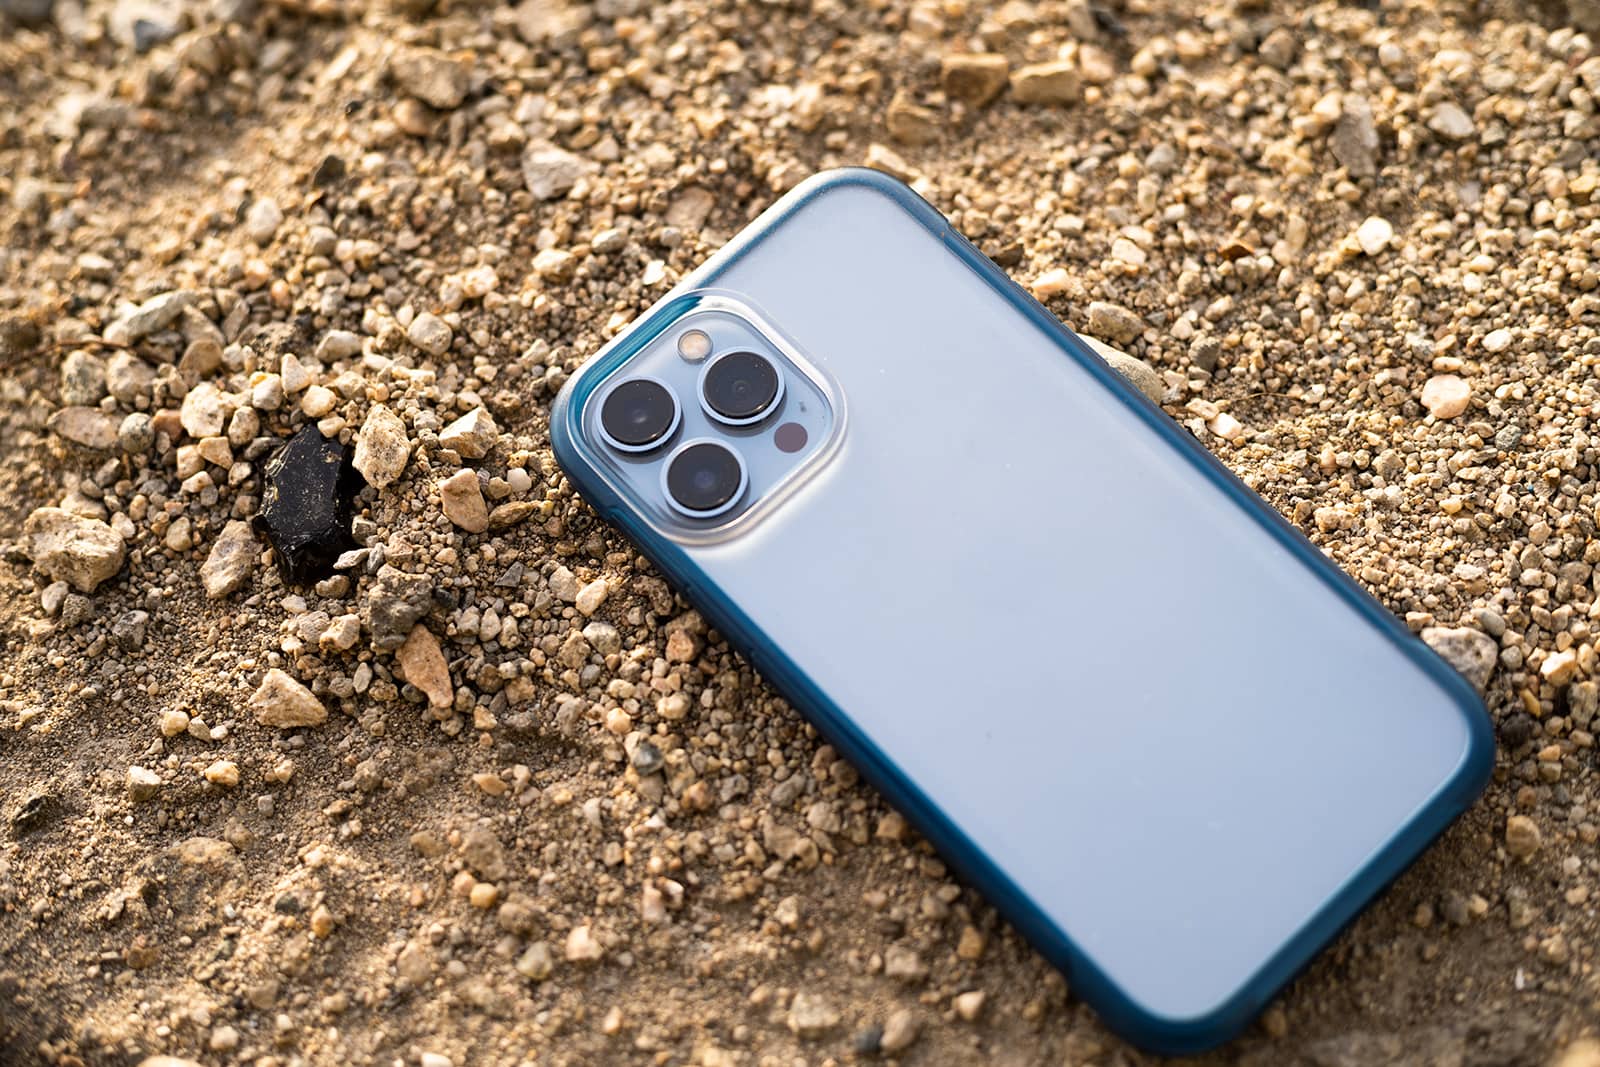 Raptic Terrain iPhone 13 Pro Case: This case is drop-tested from 10 feet, so you know it can handle any adventure